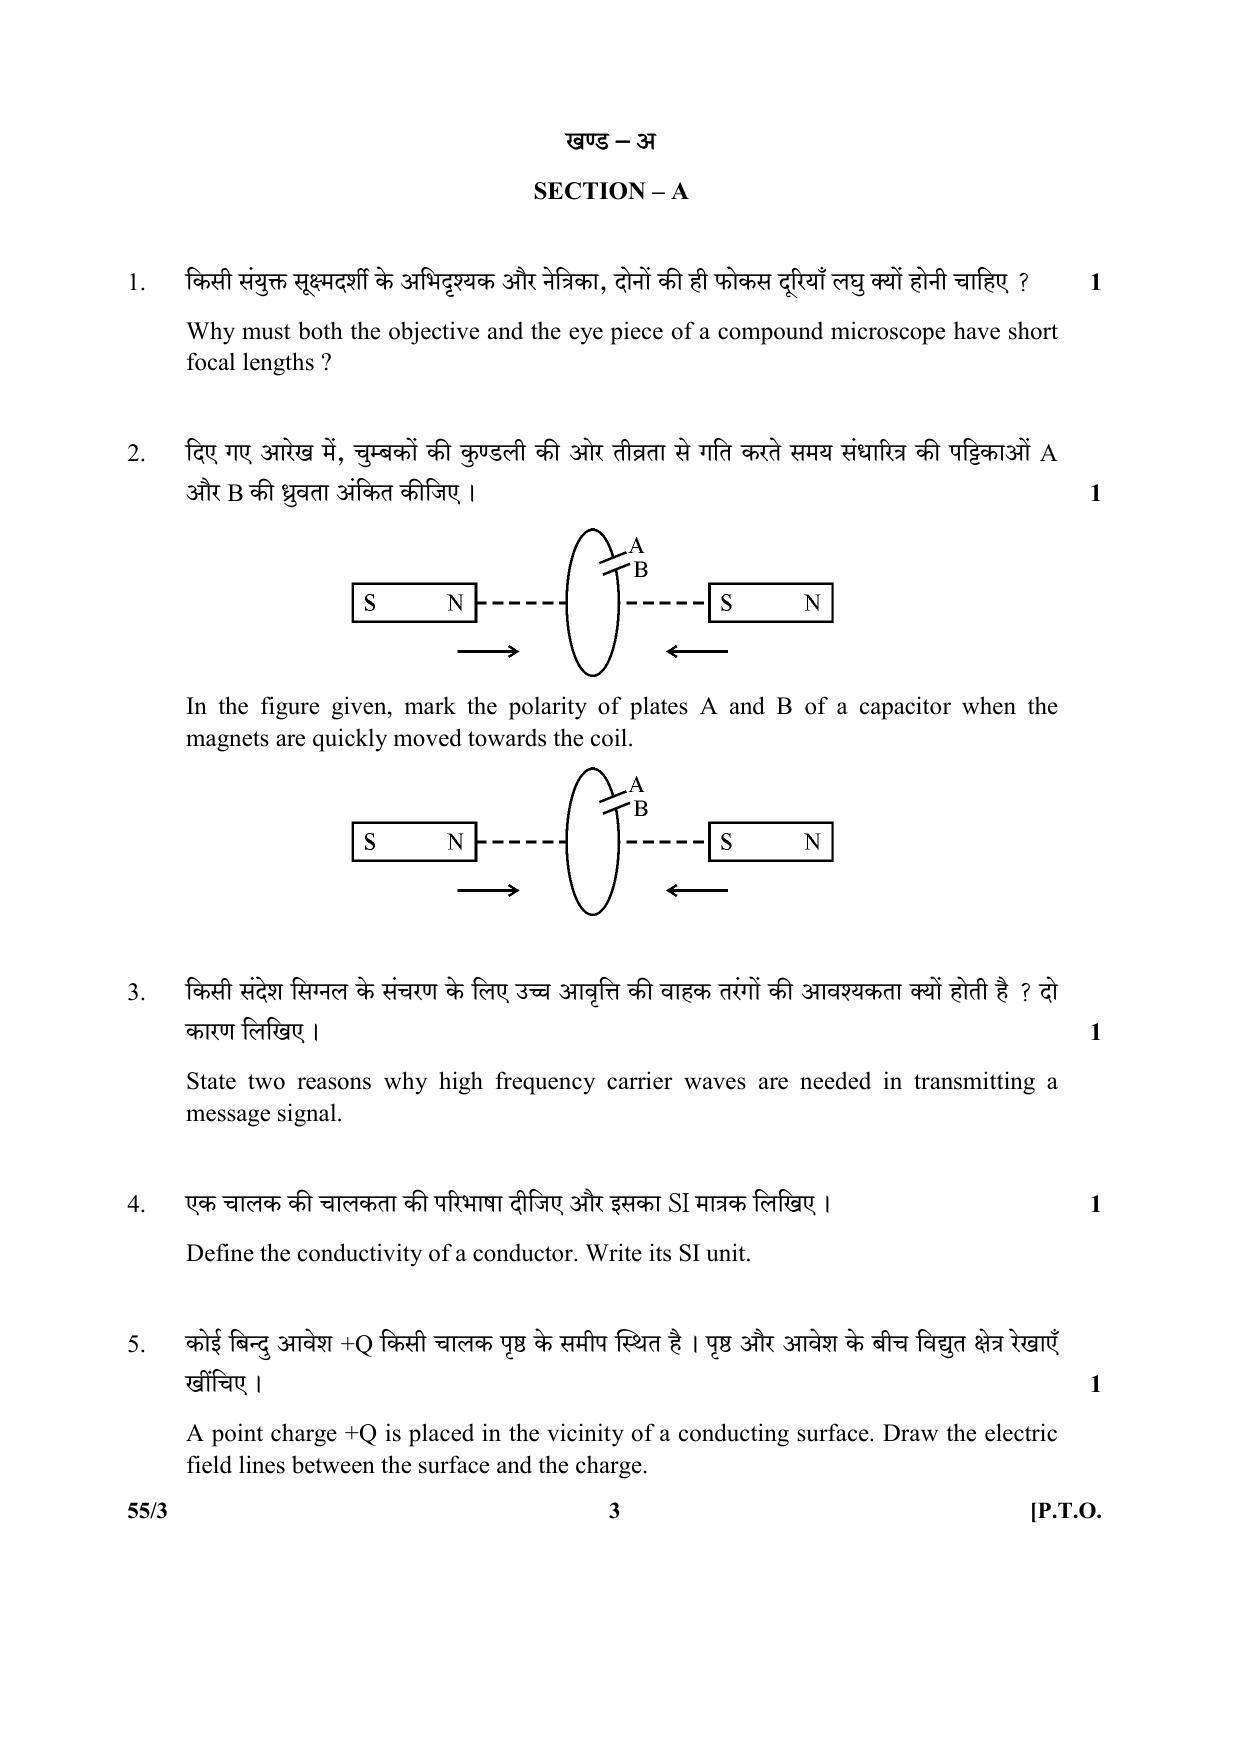 CBSE Class 12 55-3 (Physics) 2017-comptt Question Paper - Page 3